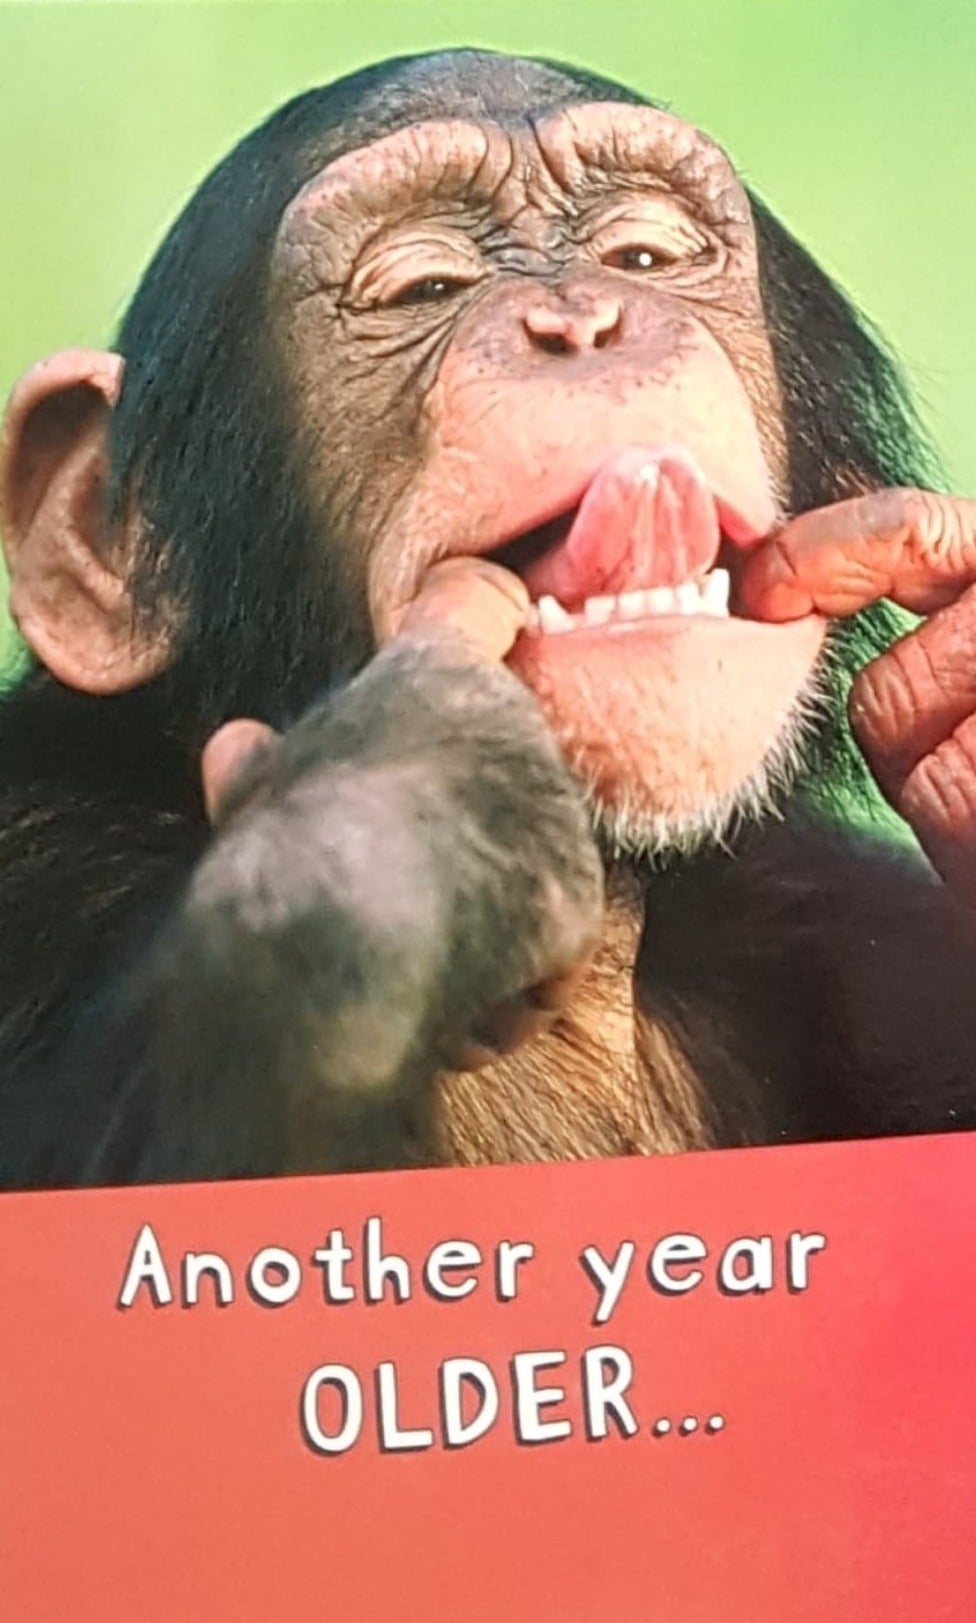 Birthday Card - Humour / A Funny Monkey Showing His Tongue